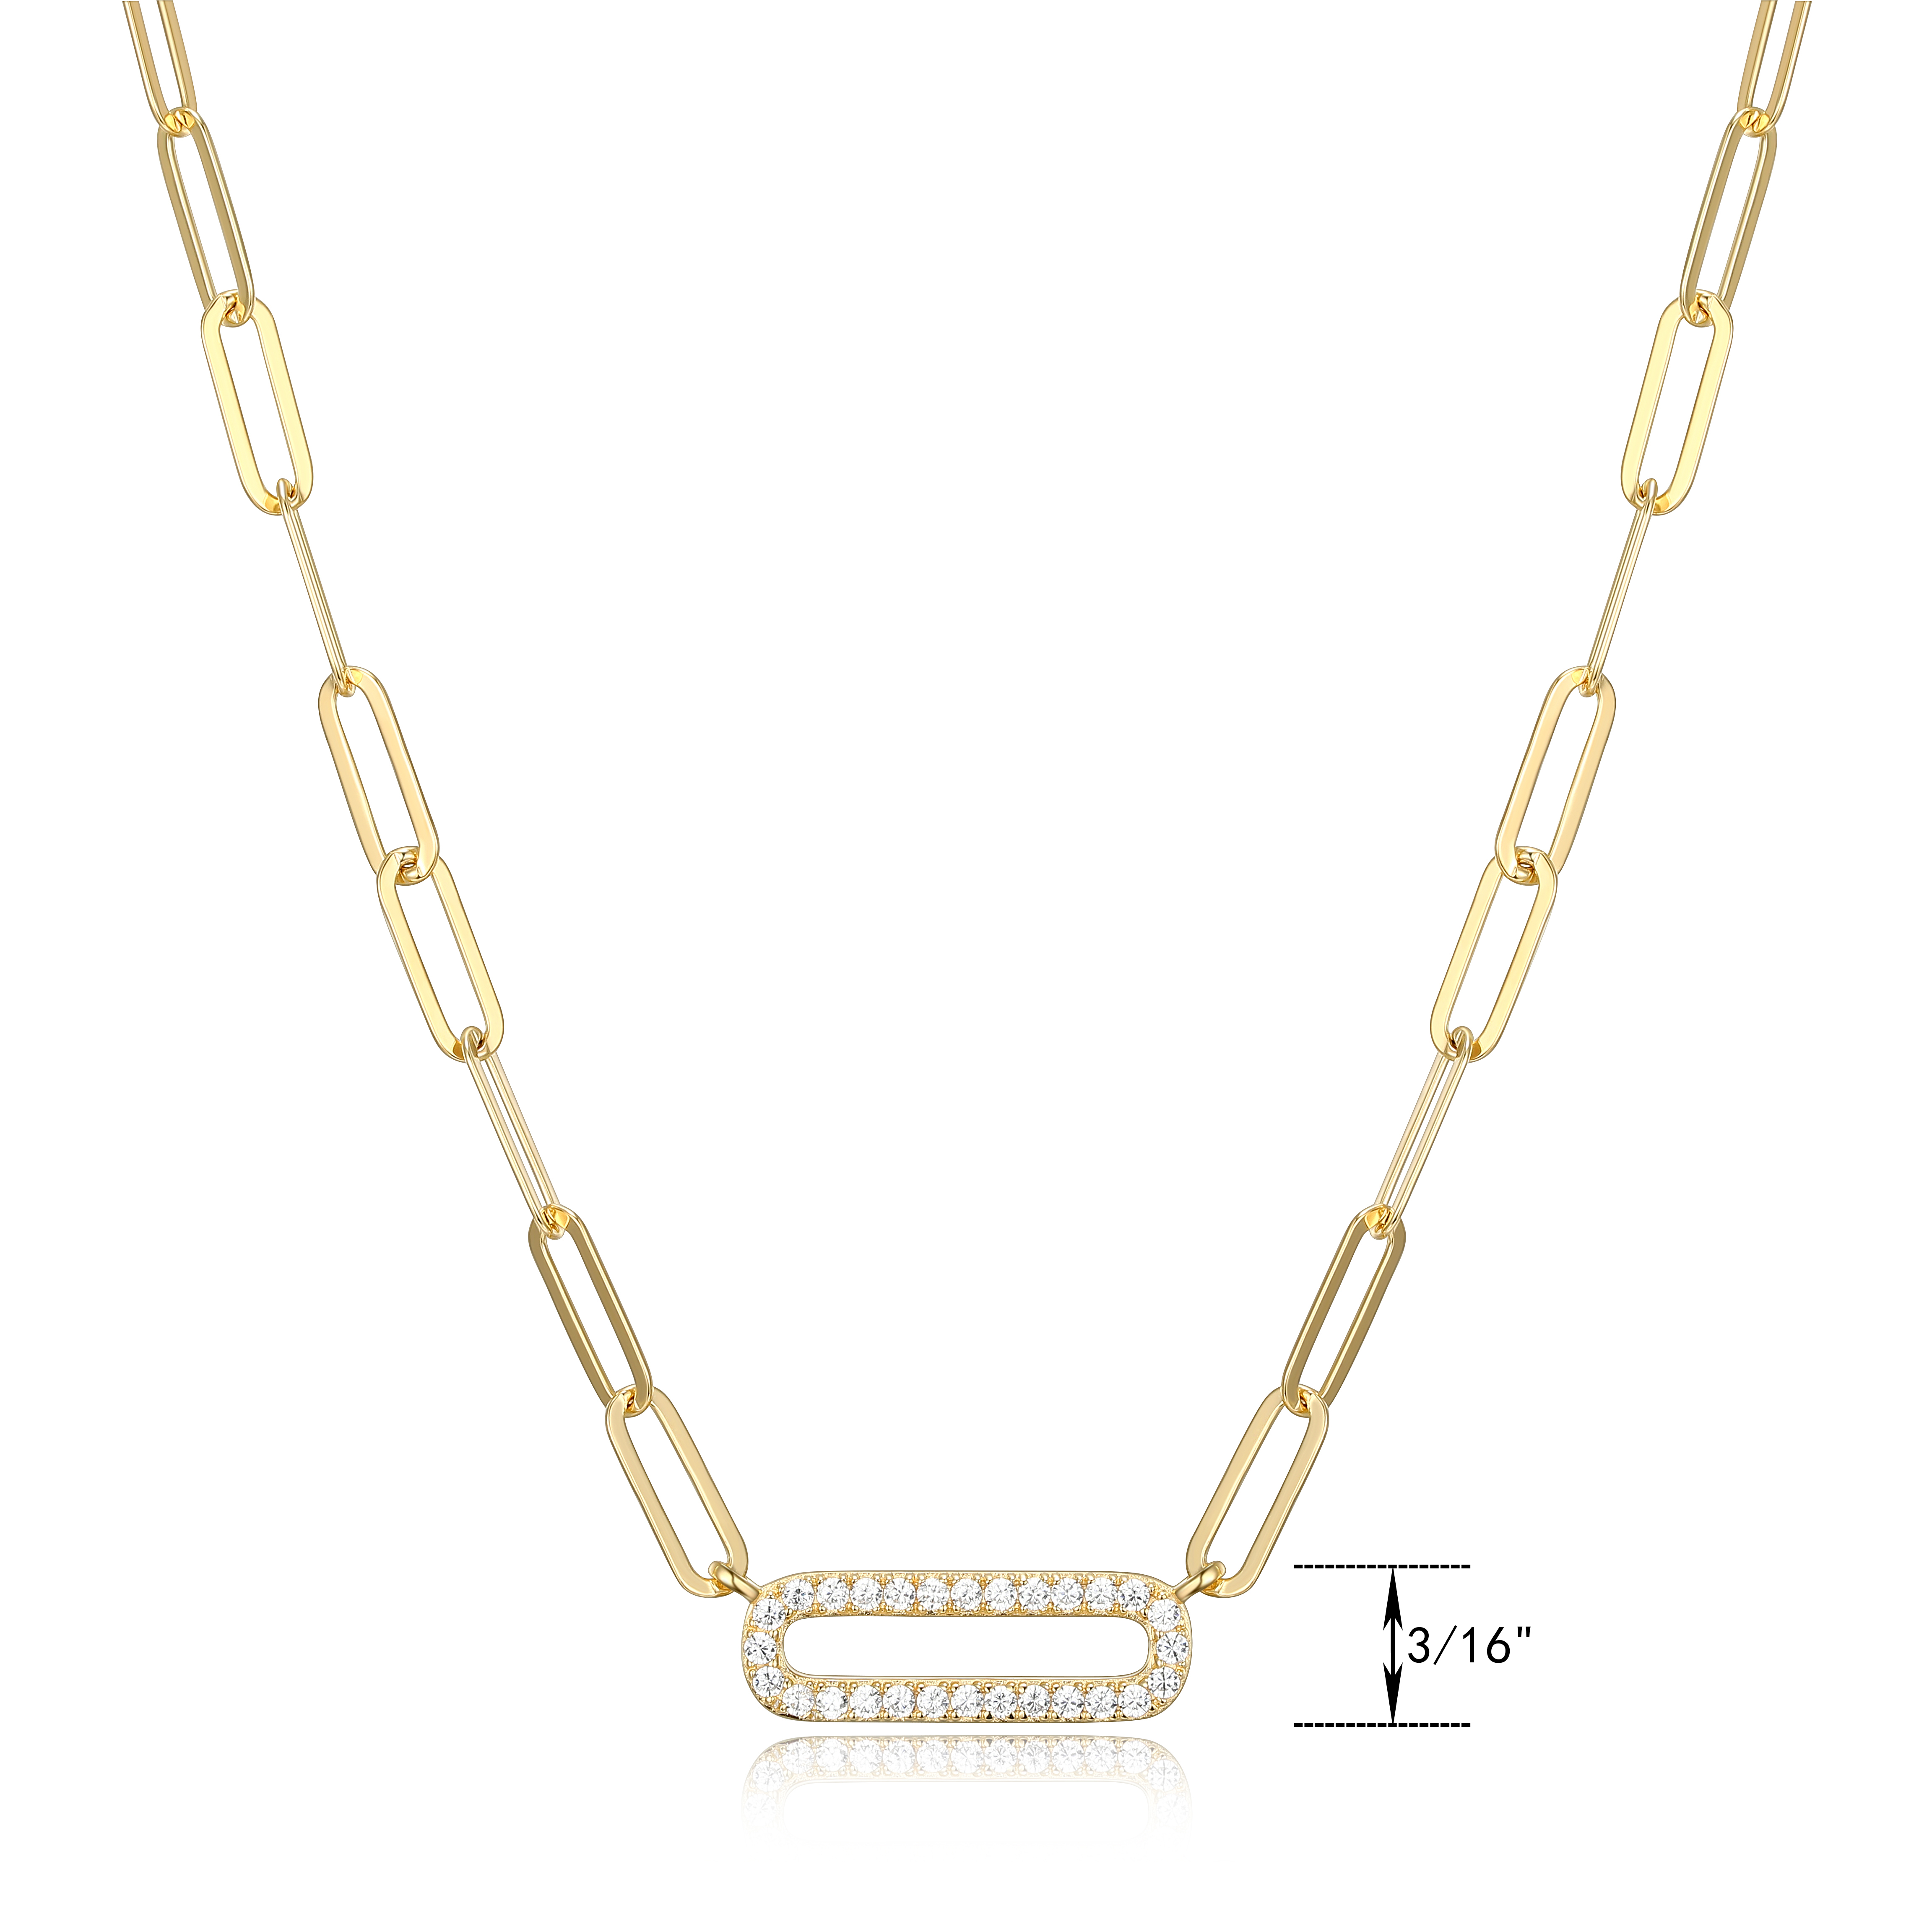 Forever Facets Cubic Zirconia Paperclip 18” Necklace in 18k Gold over Sterling Silver, Adult Female - image 3 of 9